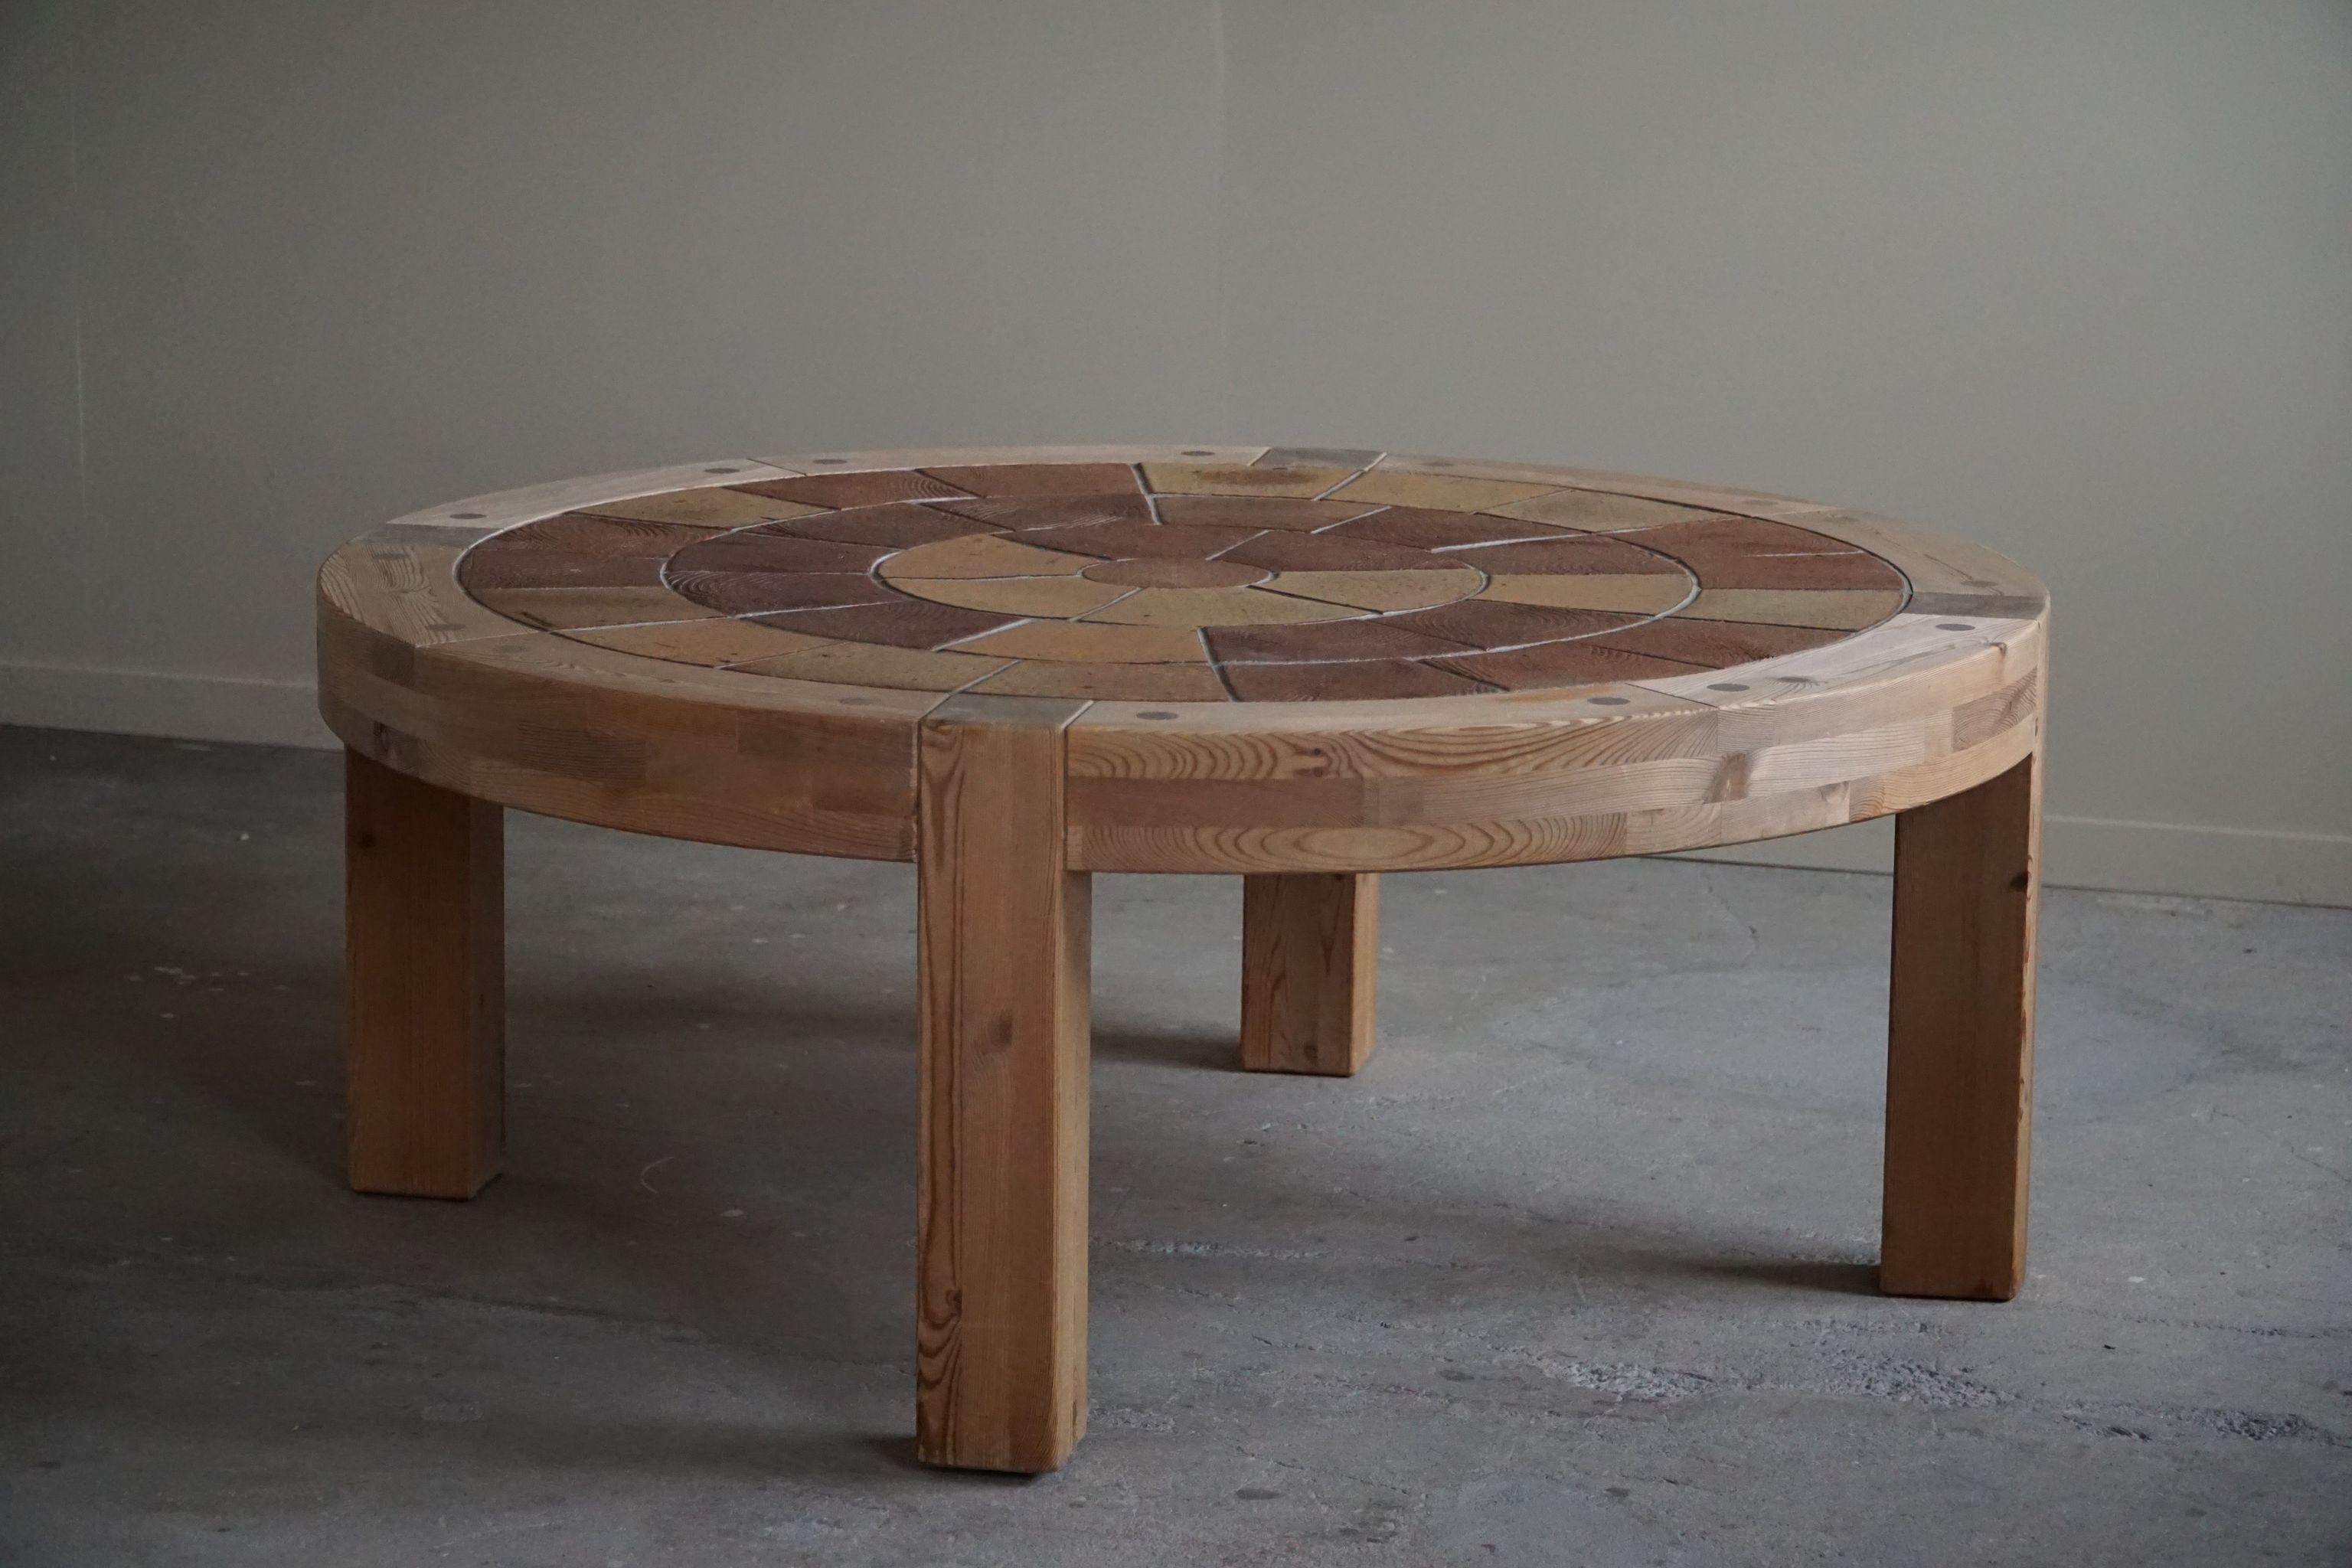 Sallingboe, Large Round Coffee Table in Pine & Ceramic, Danish Design, 1970s In Good Condition For Sale In Odense, DK